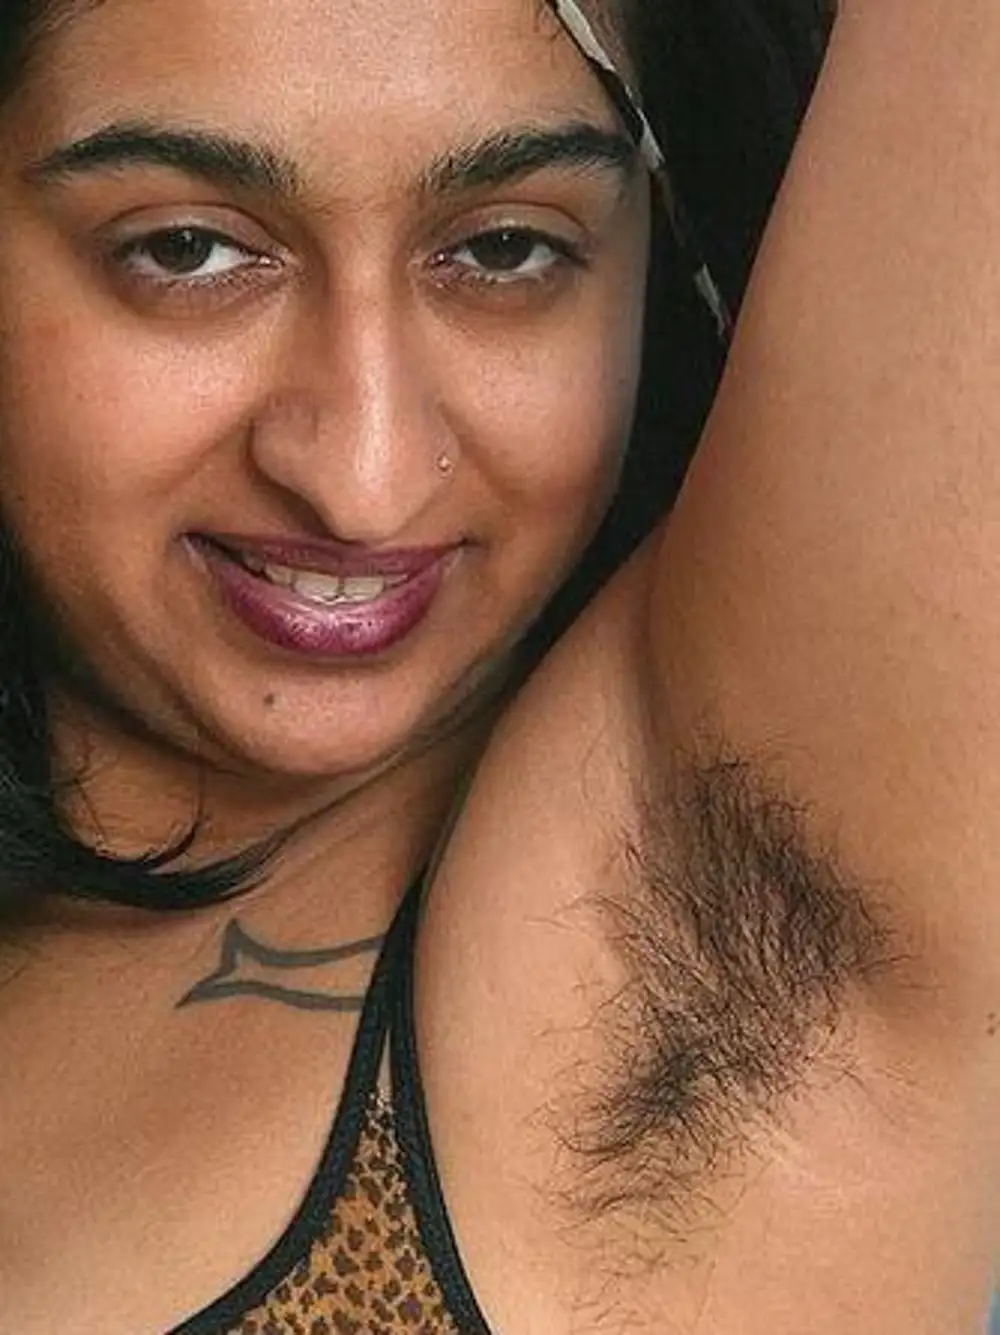 Why are indians hairy